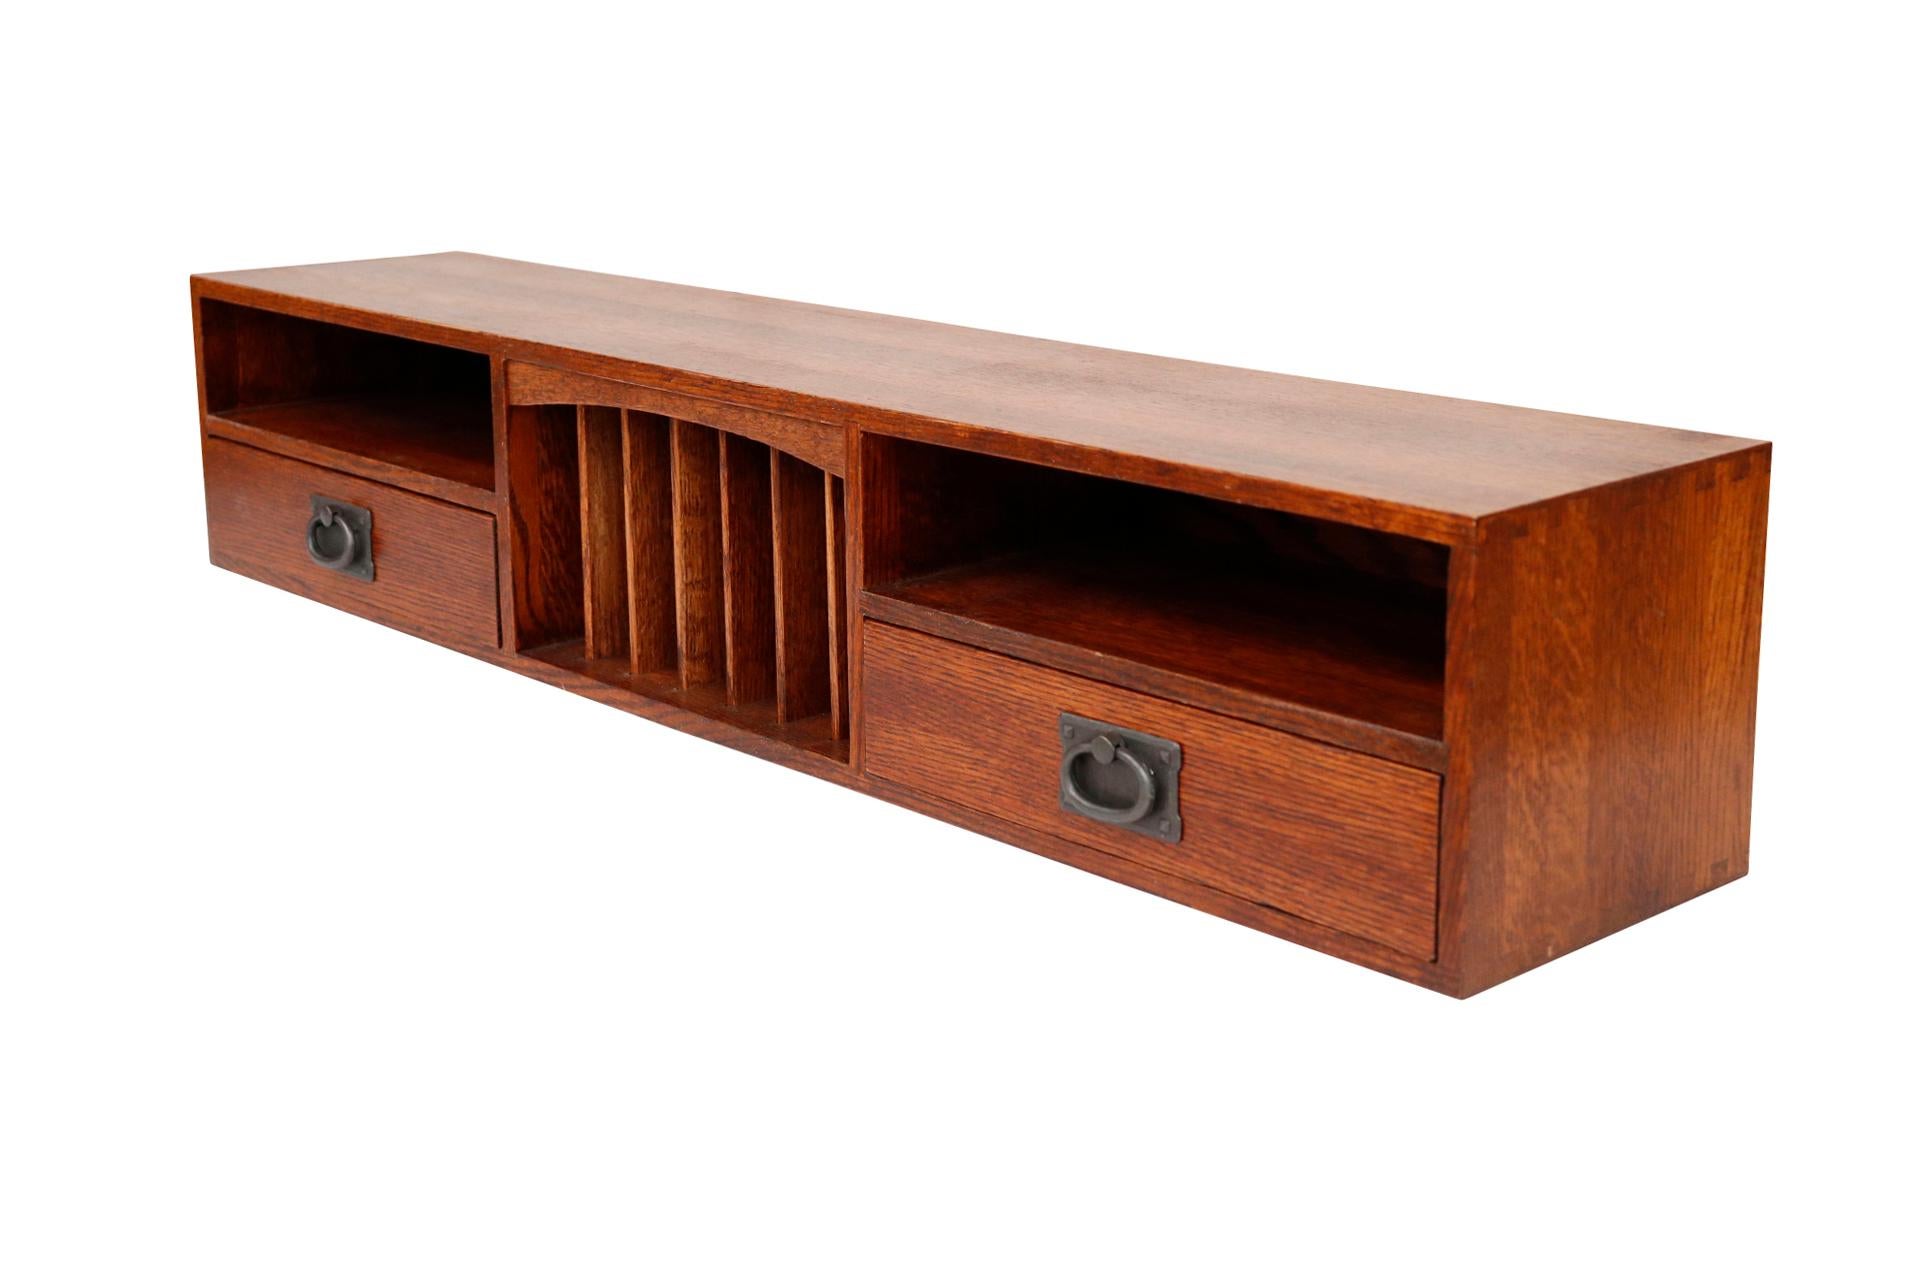 A Mission style desk top organizer. Solid oak wood with rich grain is constructed with dovetailed joints. A slotted organizer in the center is decorated with an arched bracket flanked with a shelf over dovetailed drawers at each side. Drawers open